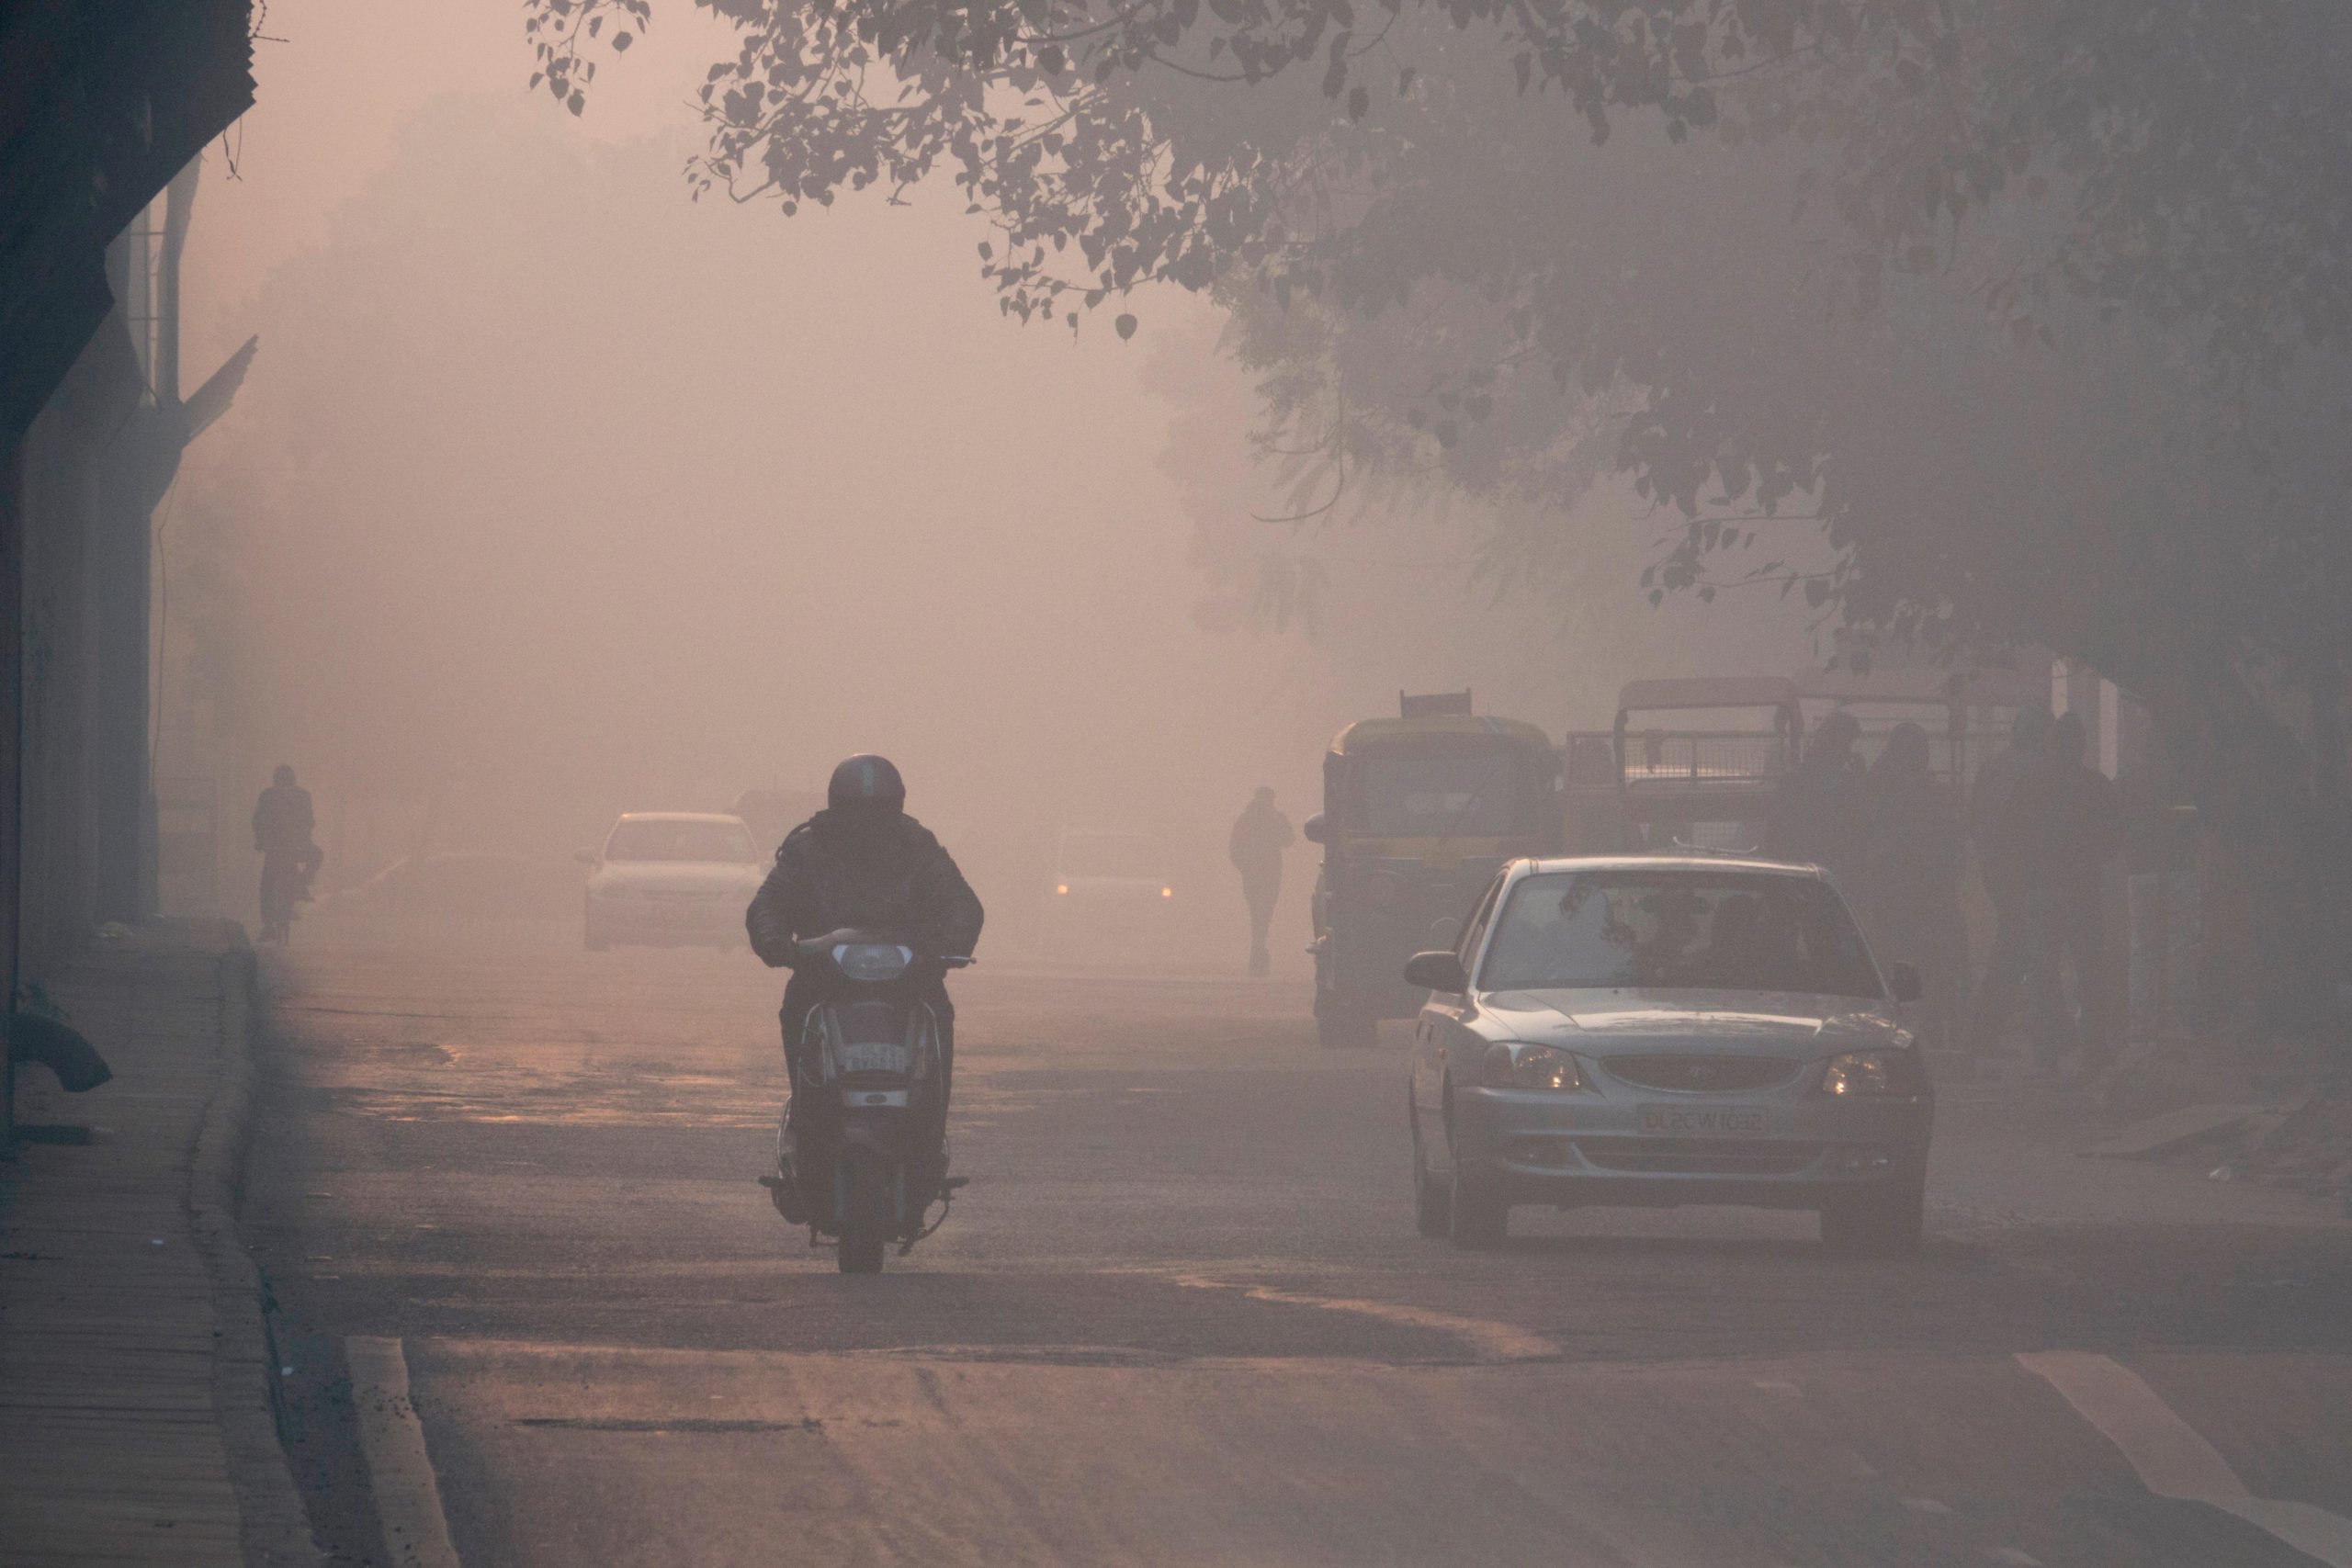 The heavy levels of pollution in Delhi reveal the failure of India's air pollution policies